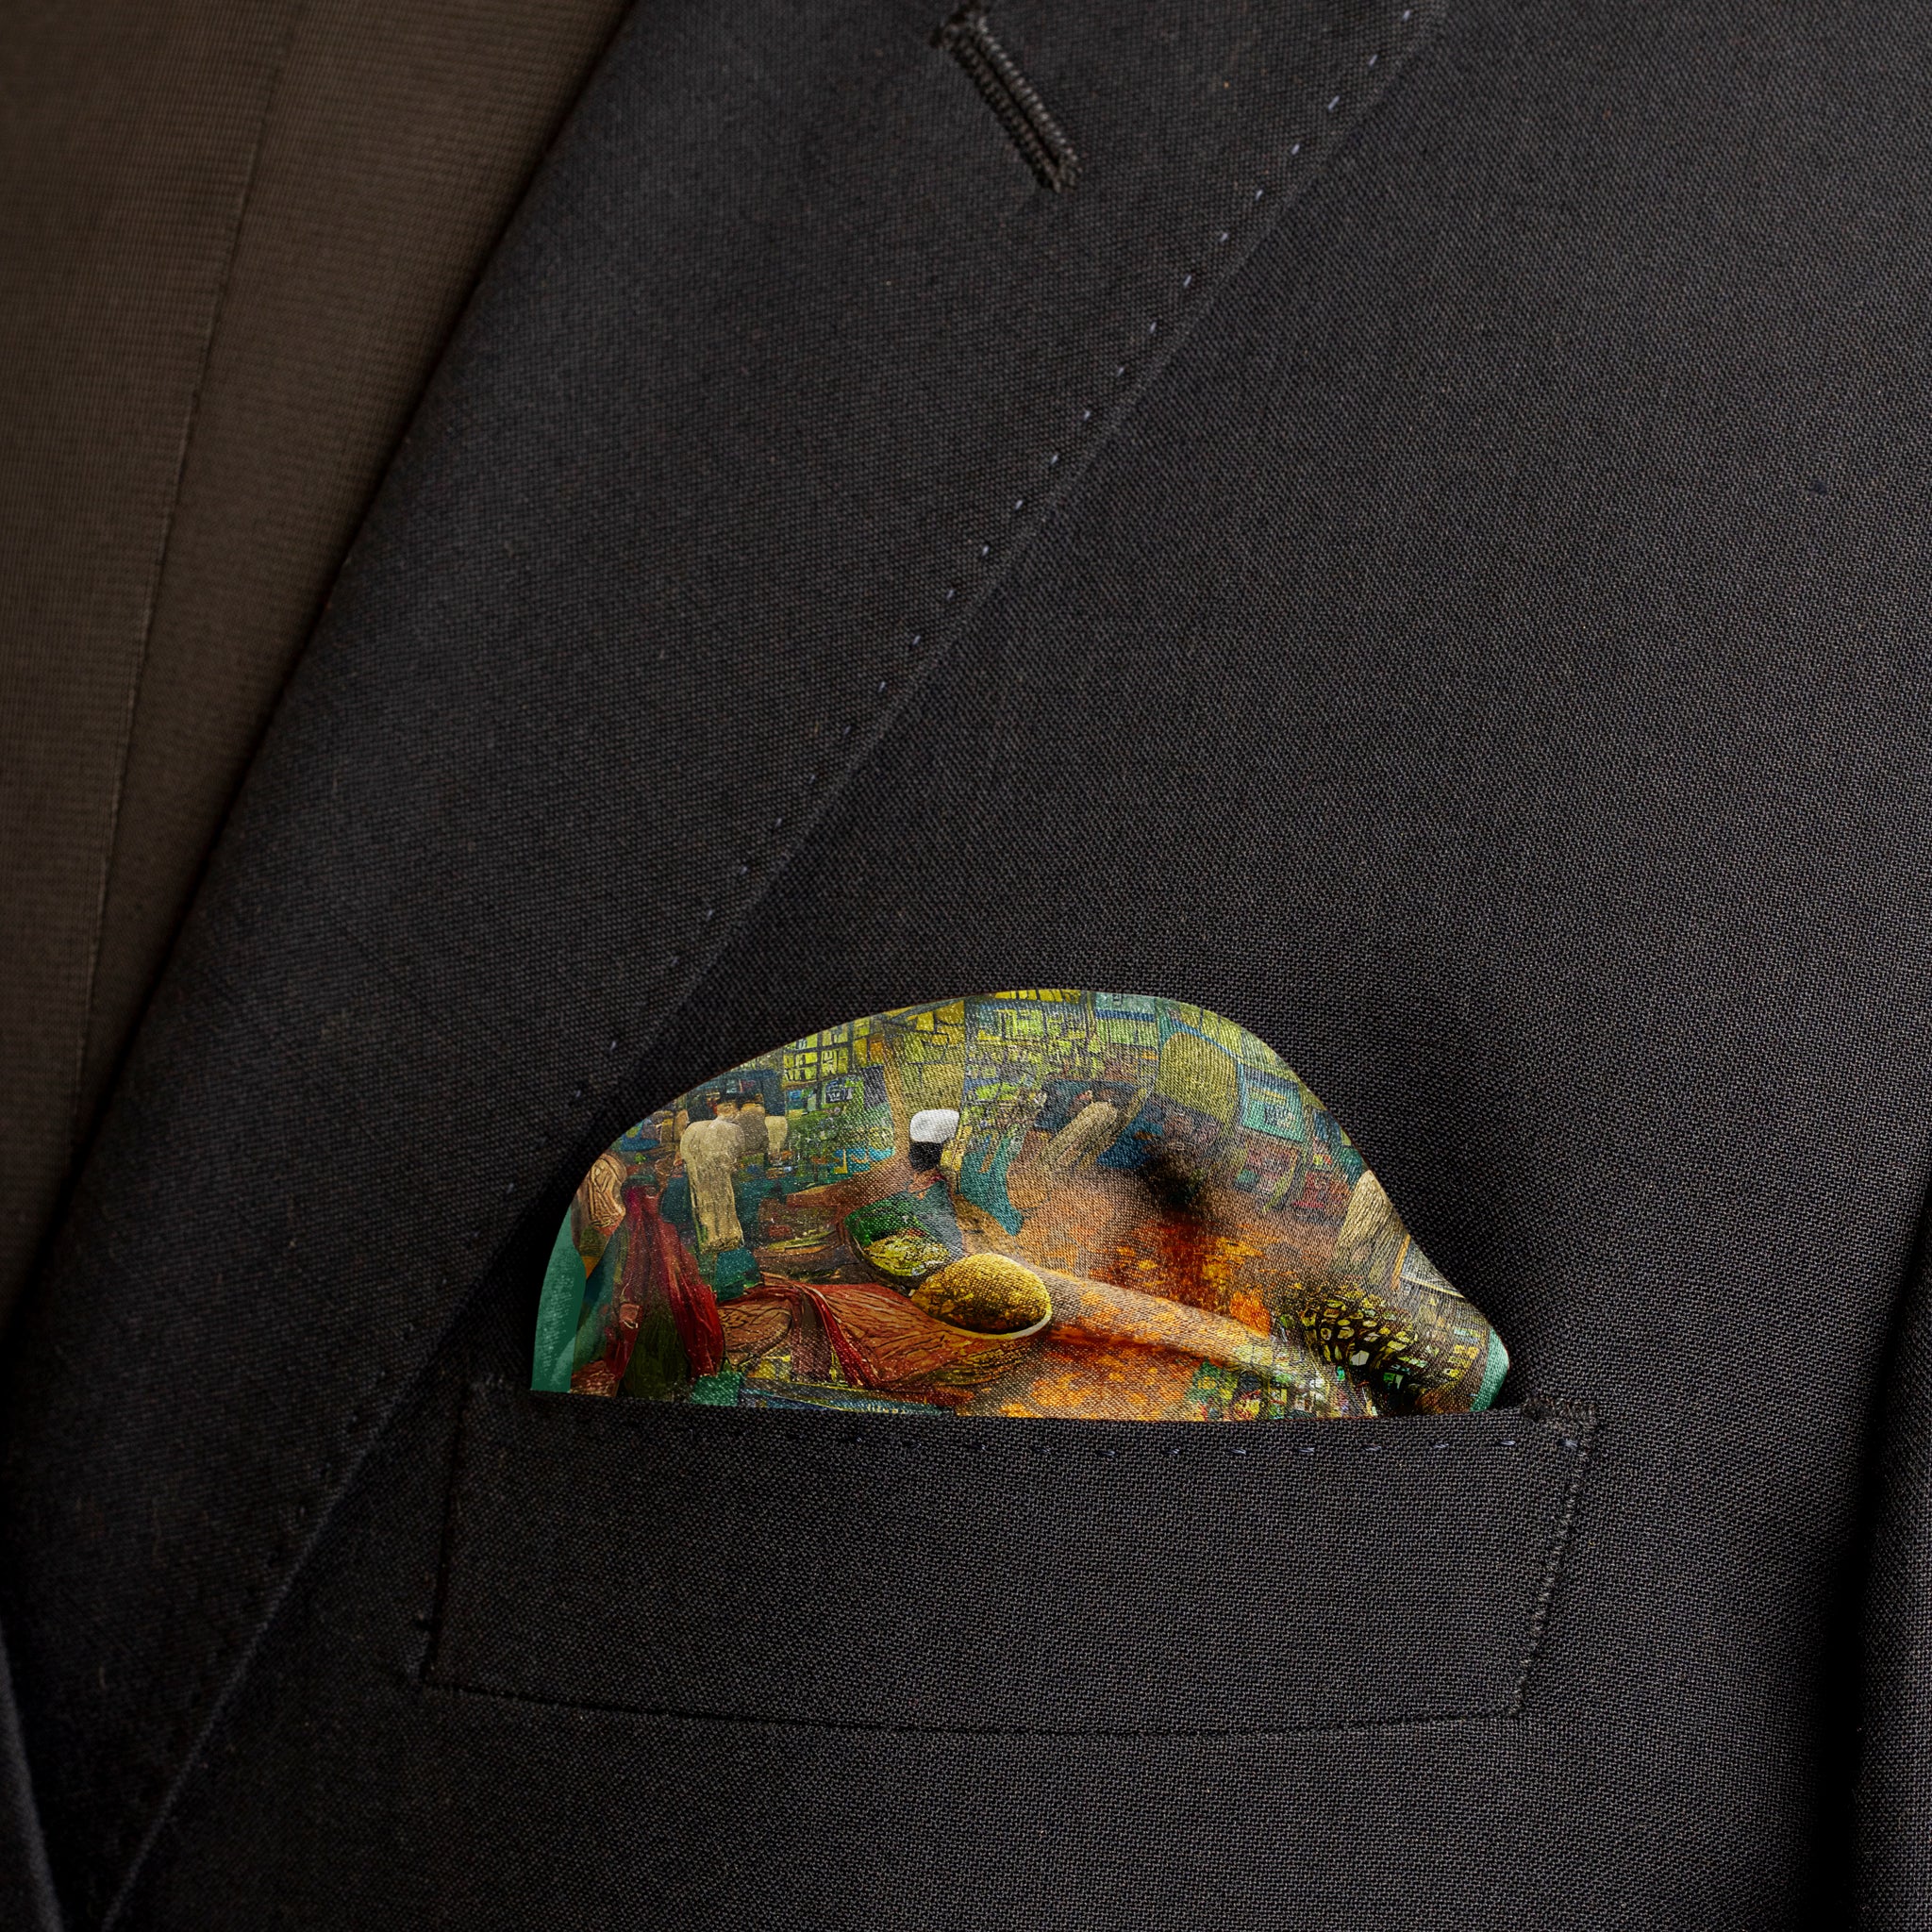 Indian Spice Bazaar Pocket Square From Chokore Arte Collection